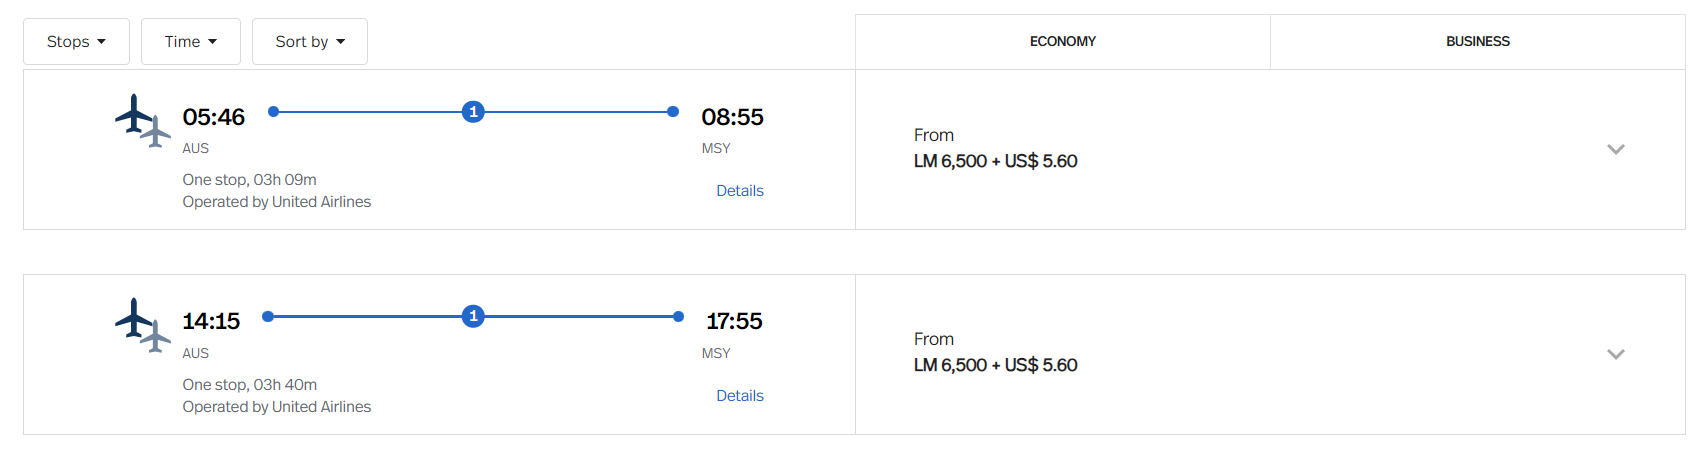 Redeeming Avianca LifeMiles for a short connecting flight